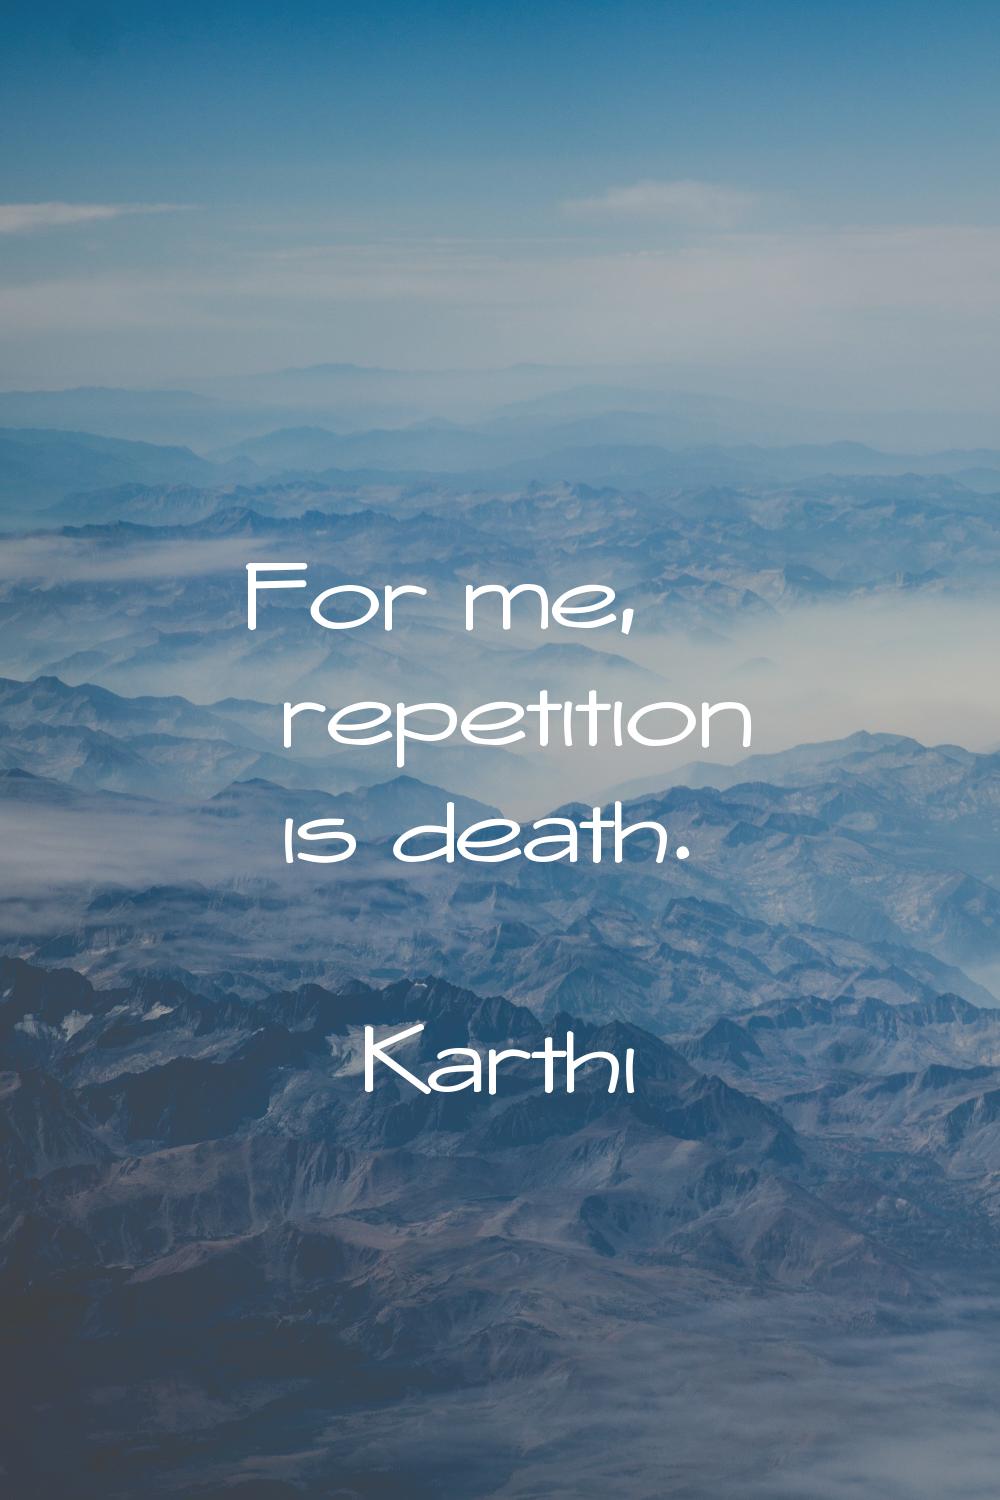 For me, repetition is death.